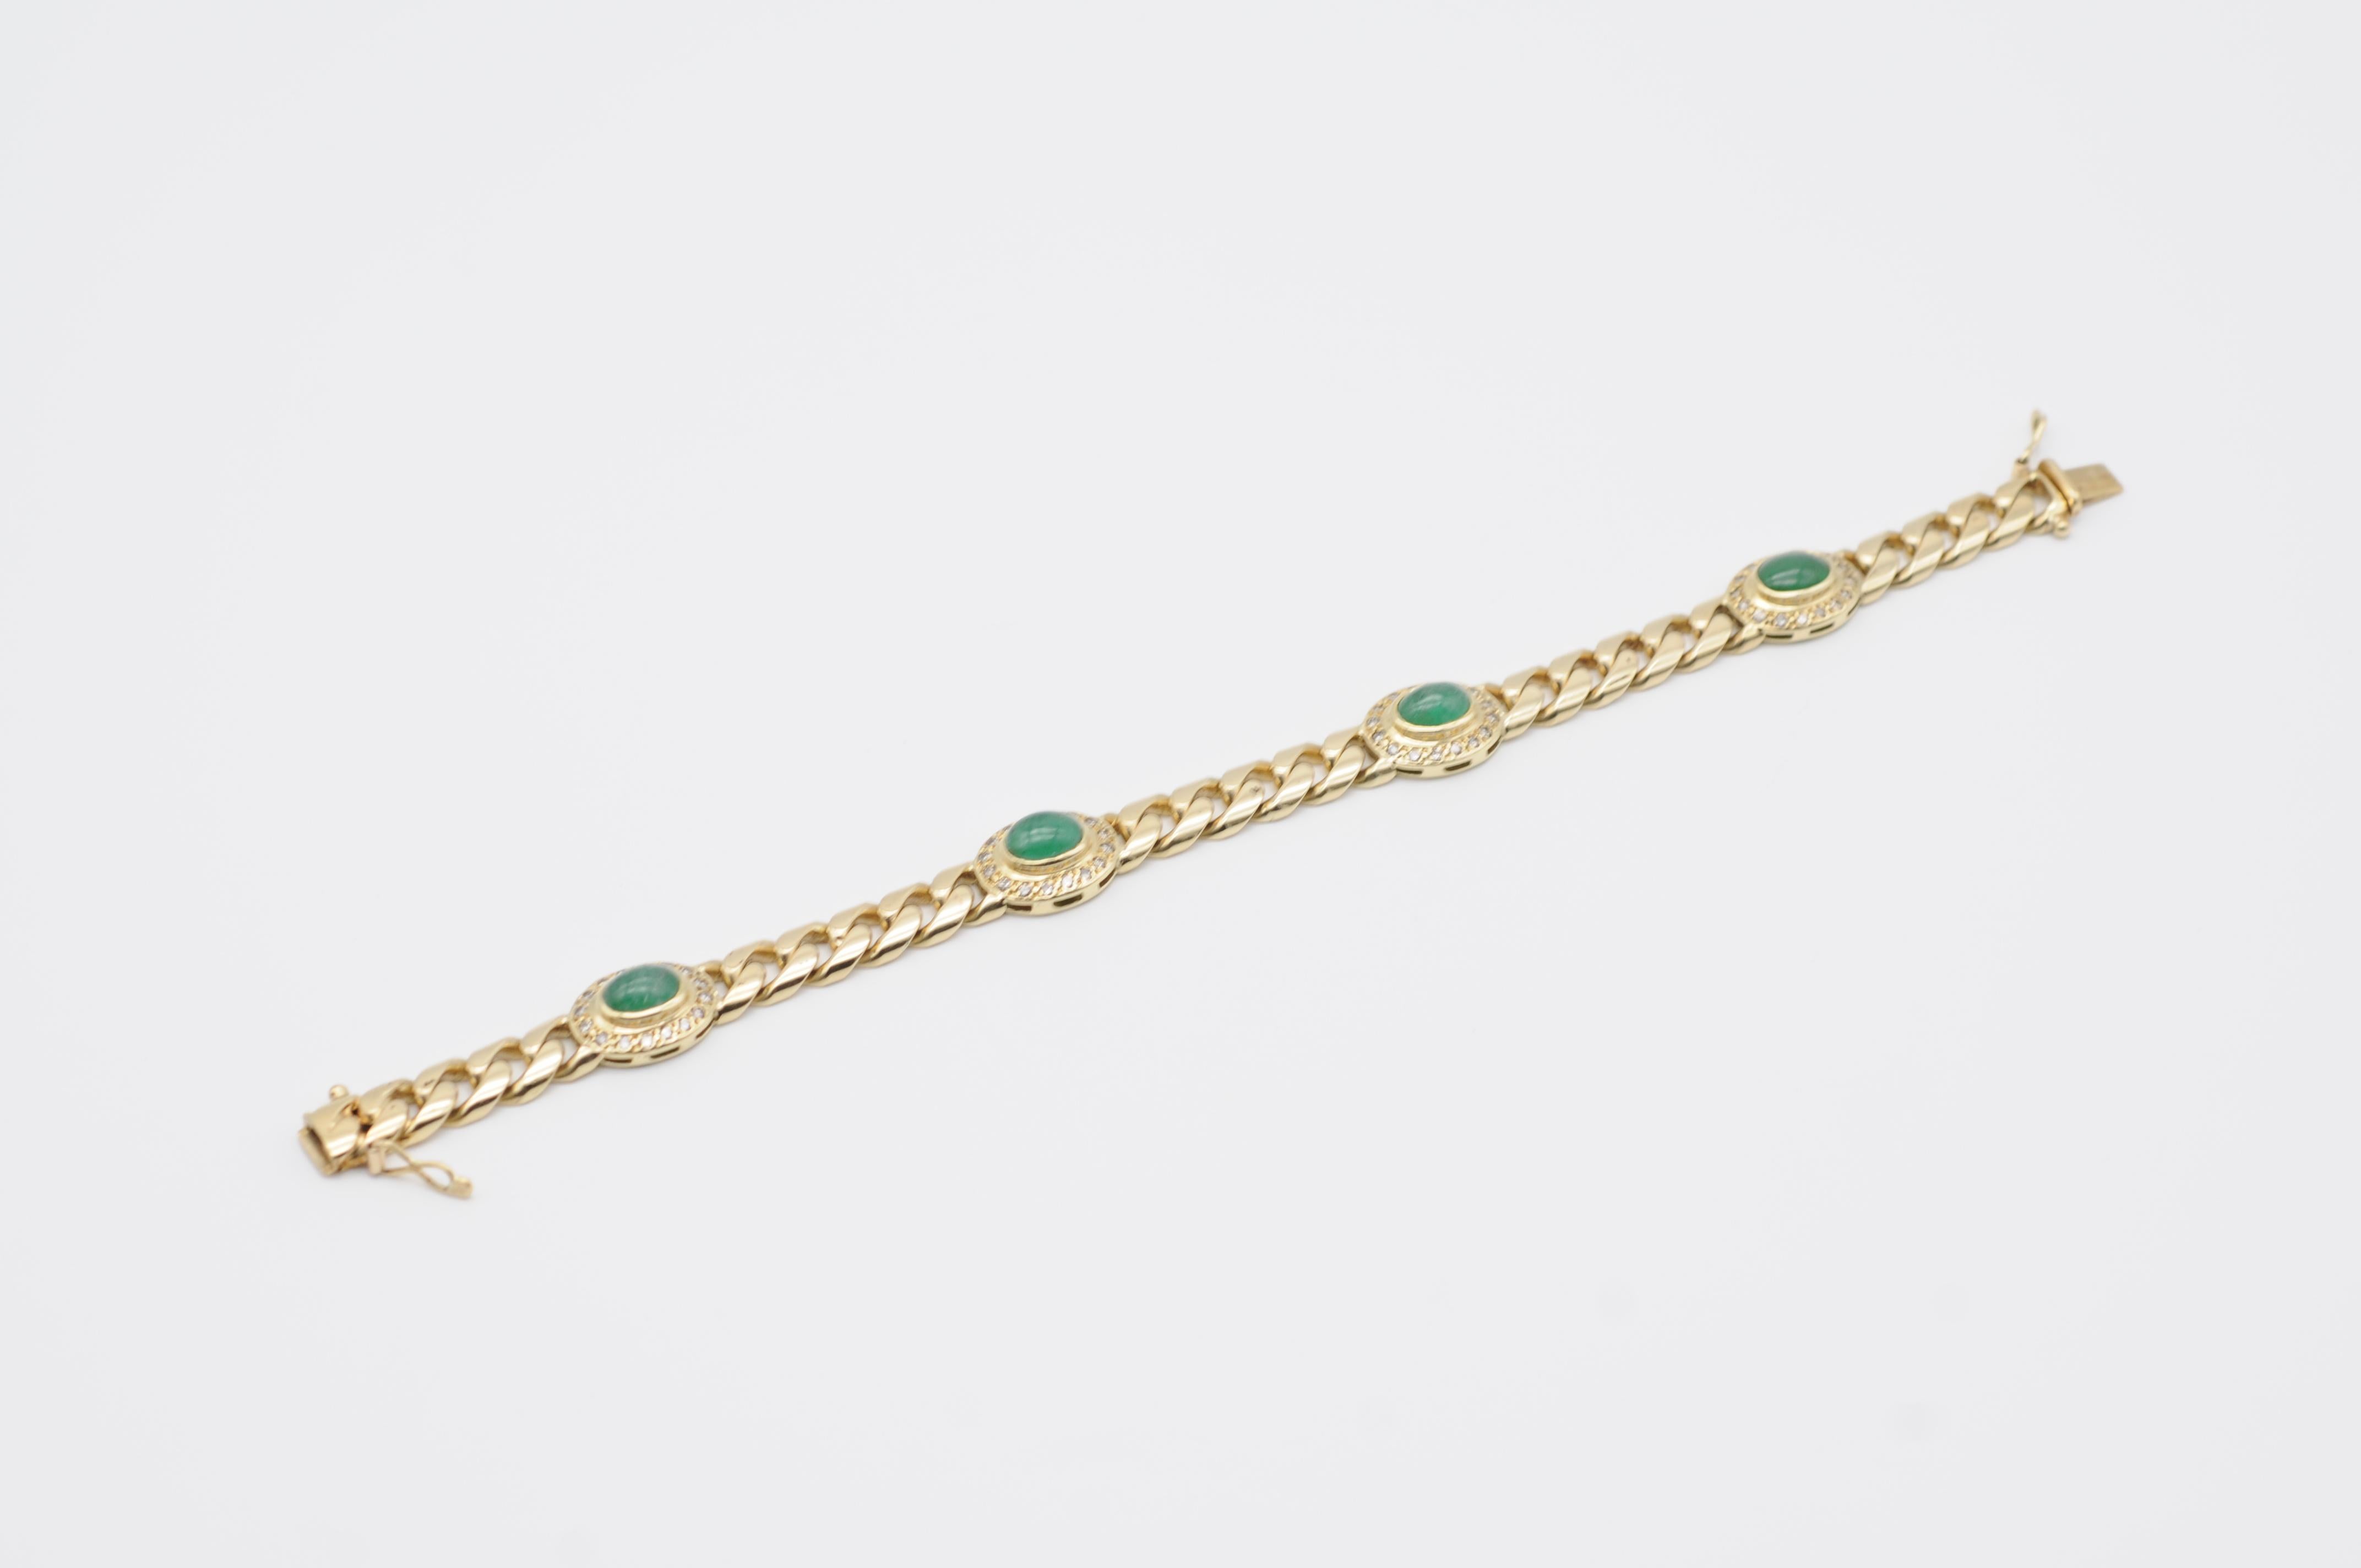 This solid 14k yellow gold bracelet is a masterpiece of elegance and refinement. The classic link design is adorned with four exquisite green cabochons that showcase the beauty of natural gemstones. These stones are of exceptional quality, with